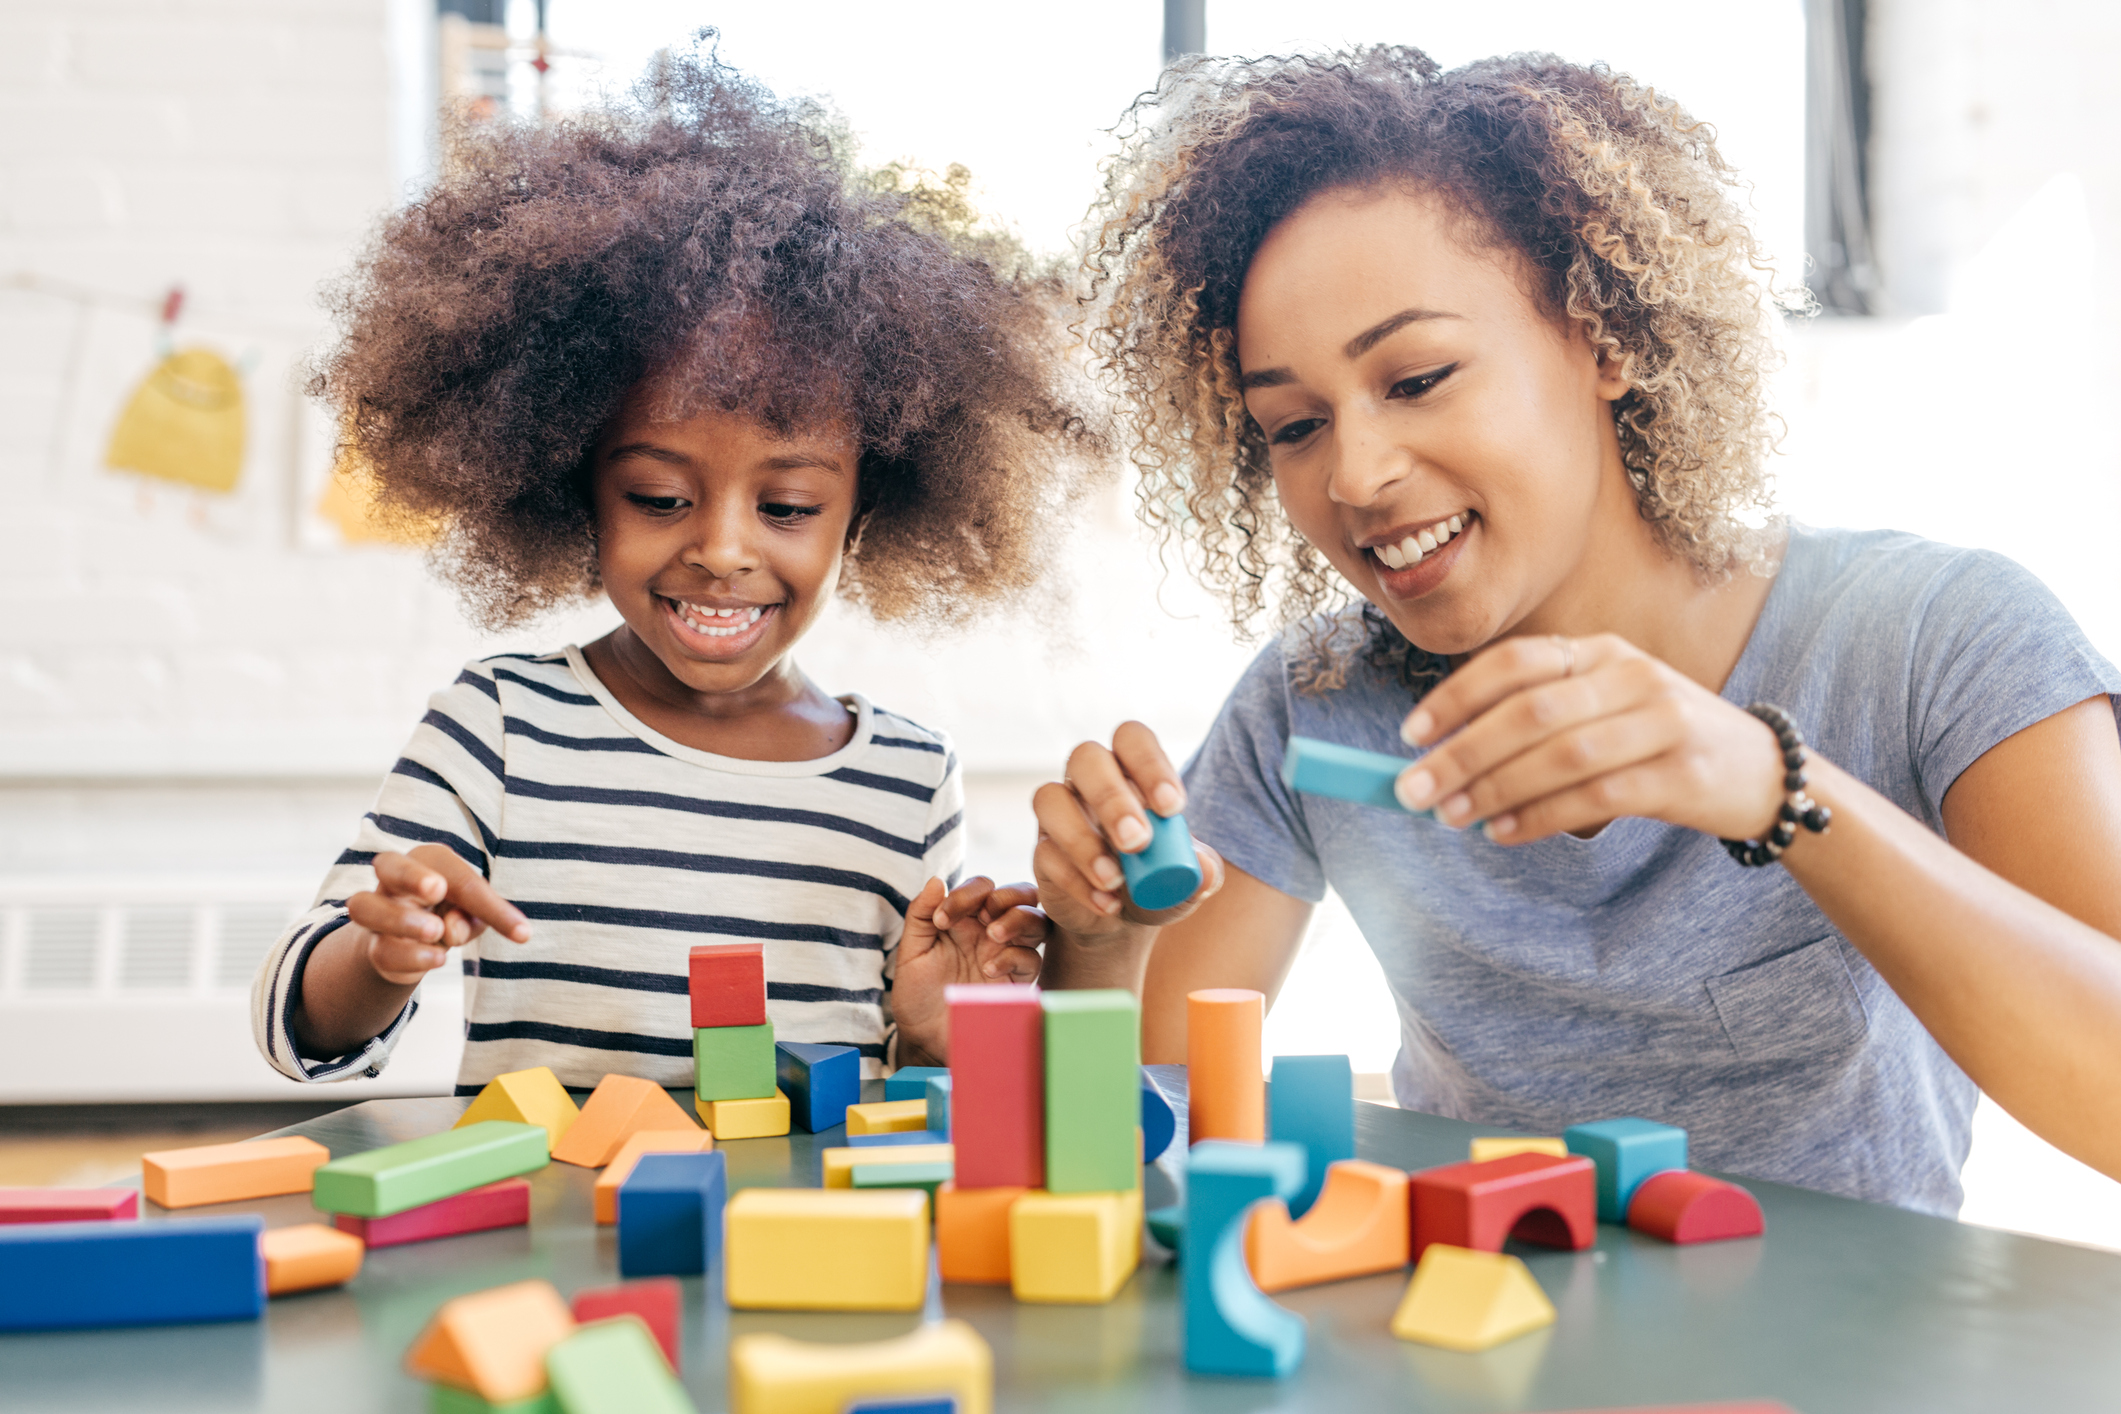 Woman and a girl playing with wooden blocks